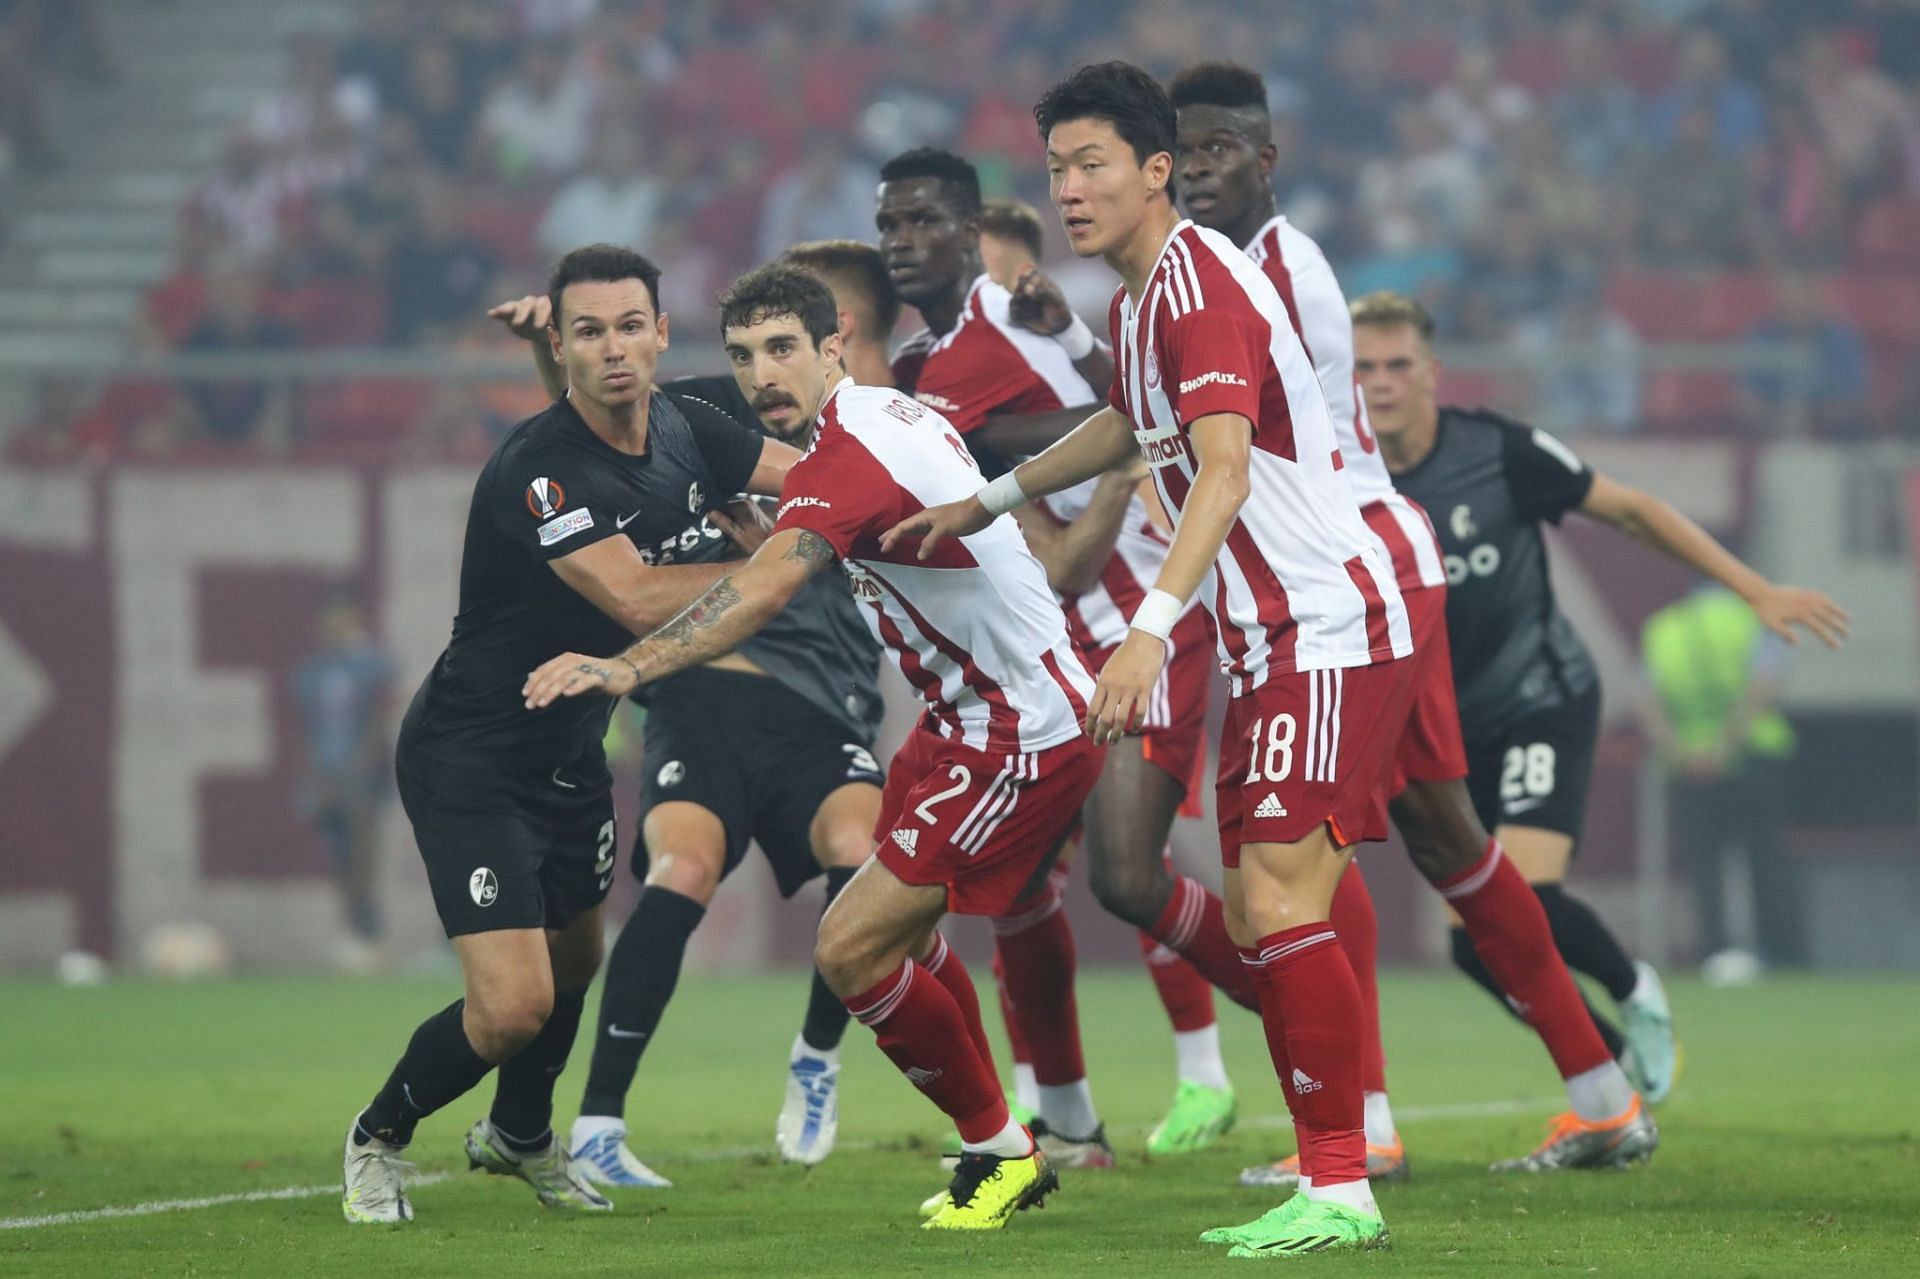 Freiburg and Olympiacos meet in the Europa League on Thursday